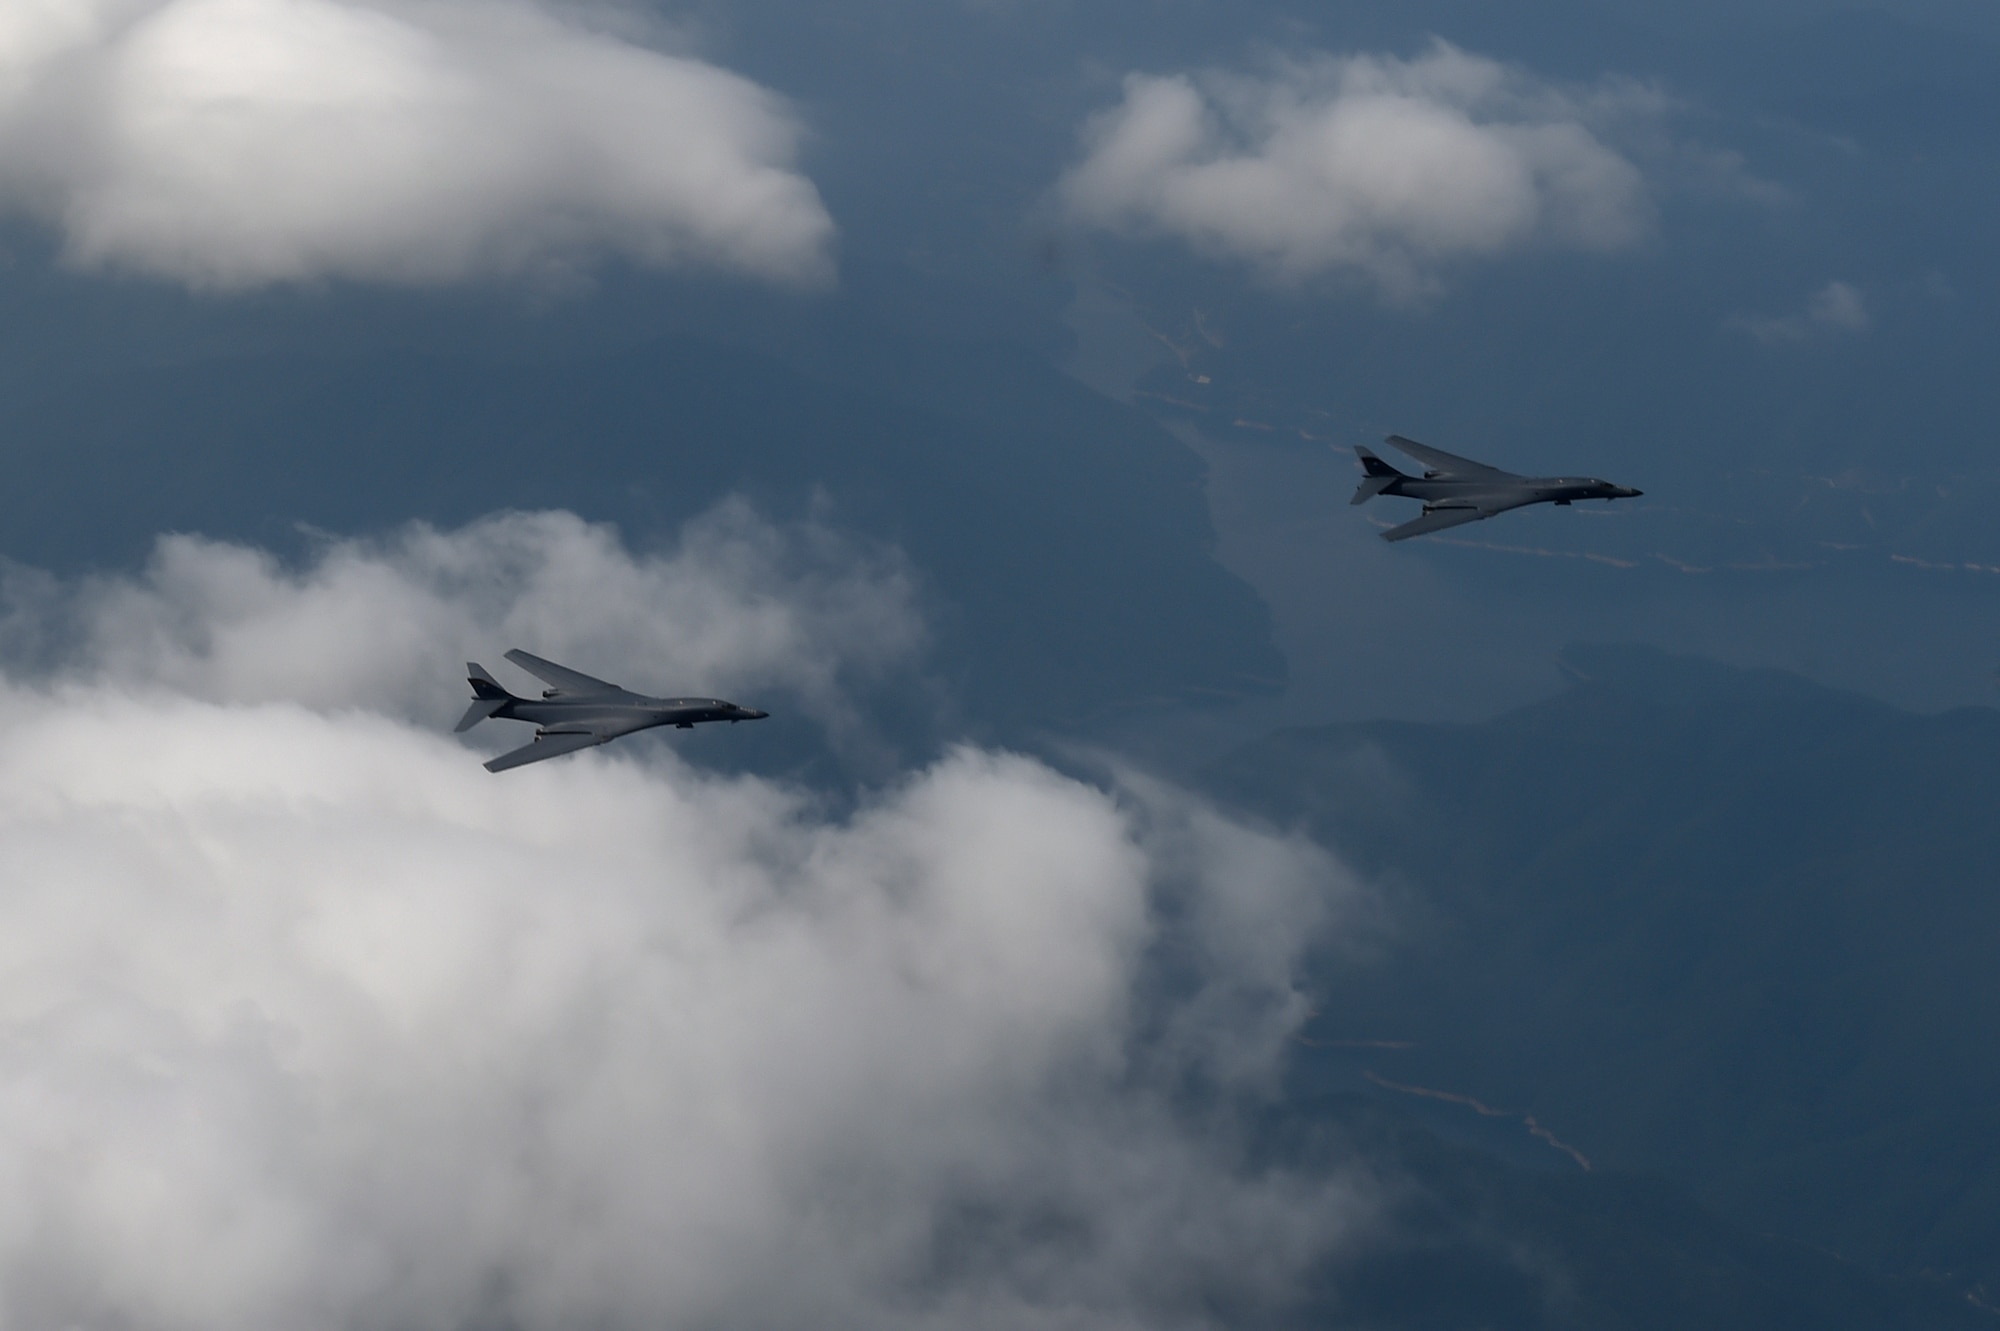 Two U.S. Air Force B-1B Lancers deployed to Andersen Air Base, Guam, fly over Republic of Korean skies Sept. 21, 2016. The flight was the closest a B-1 has ever flown to the border between the ROK and North Korea. The B-1 is the backbone of the U.S. long-range bomber mission and is capable of carrying the largest payload of both guided and unguided weapons in the Air Force inventory. (Republic of Korea air force photo by Chief Master Sgt. Kim, Kyeong Ryul)